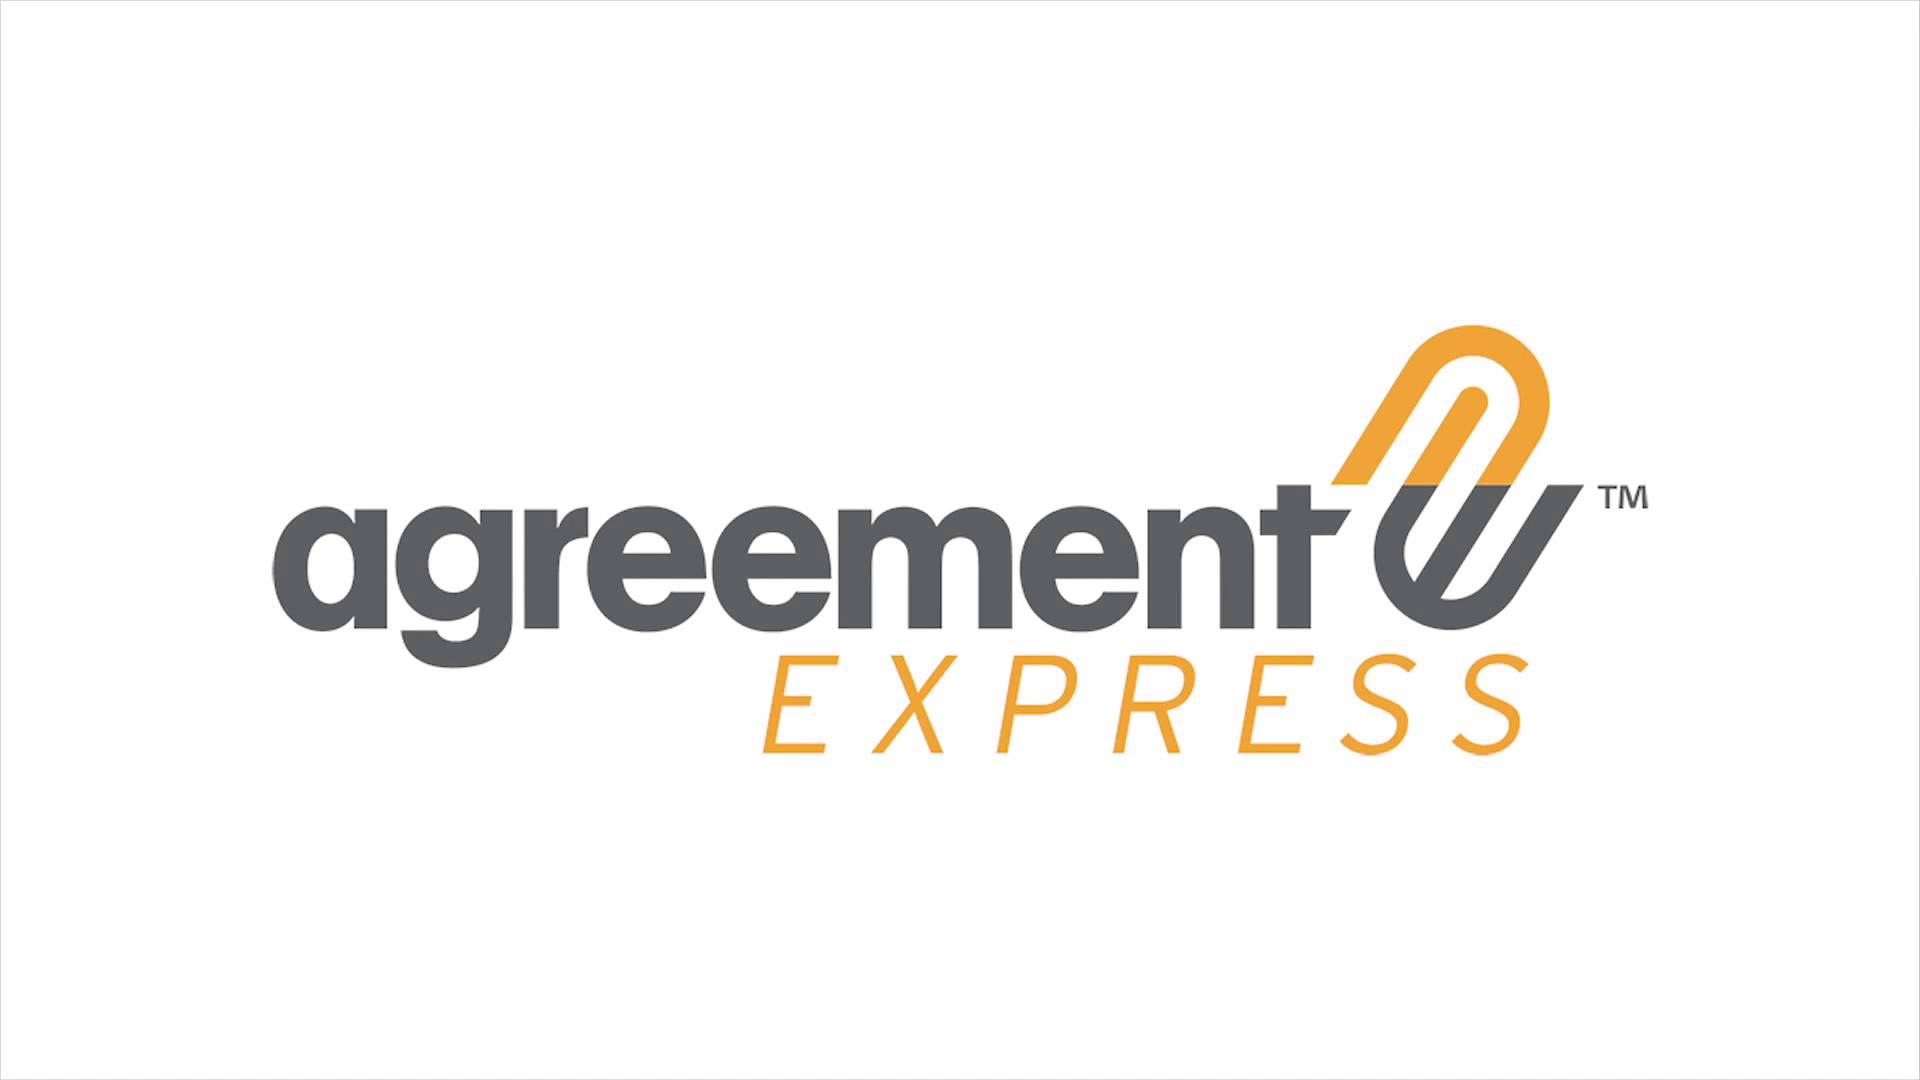 What is Agreement Express? YouTube